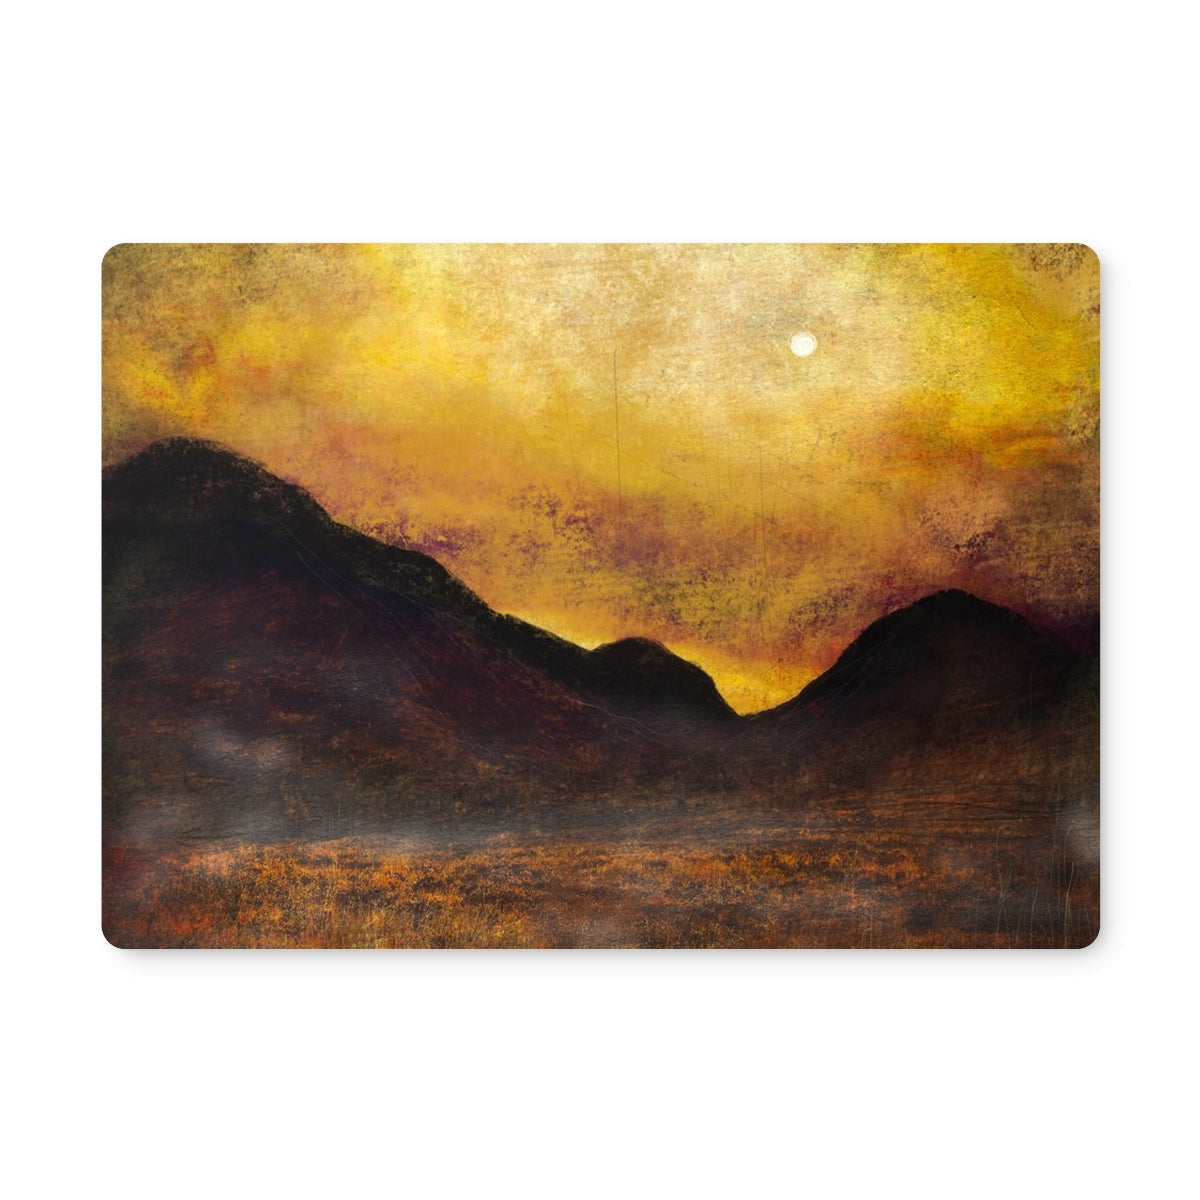 Glencoe Moonlight Art Gifts Placemat-Placemats-Glencoe Art Gallery-2 Placemats-Paintings, Prints, Homeware, Art Gifts From Scotland By Scottish Artist Kevin Hunter